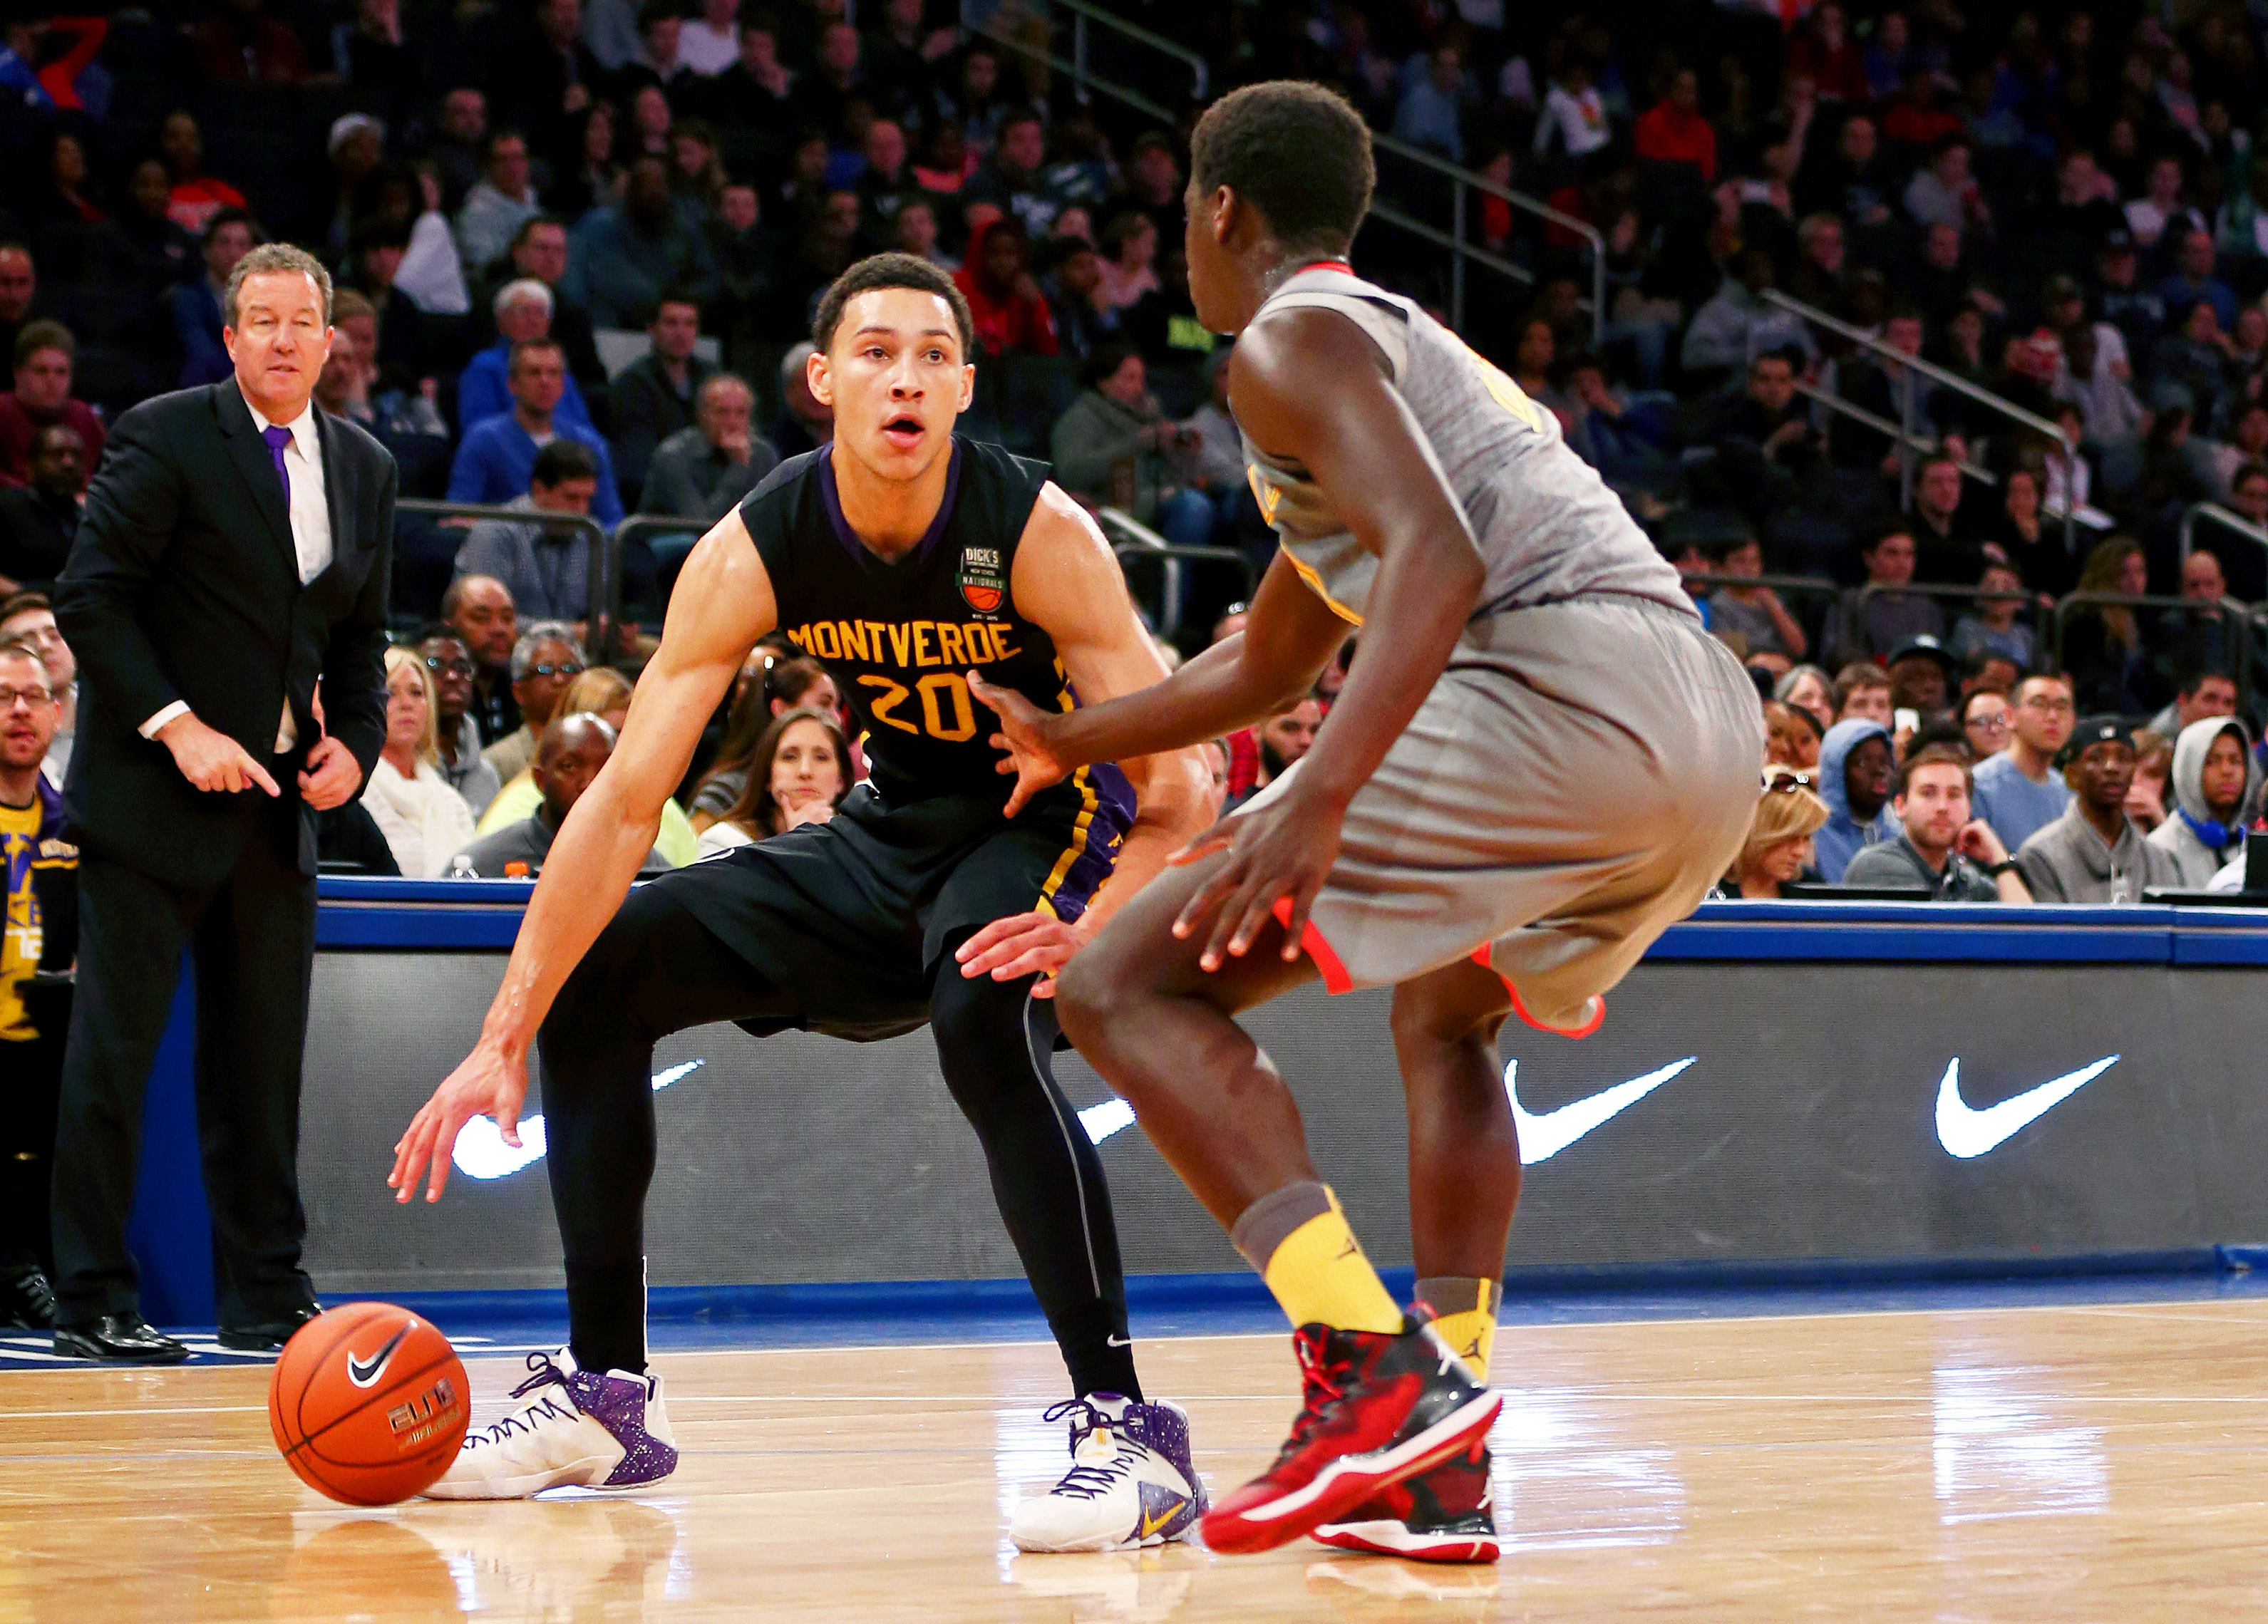 Montverde Academy and Ben Simmons won the DiICK'S Sporting Goods High School Nationals (Photo: Andy Marlin, USA TODAY Sports)